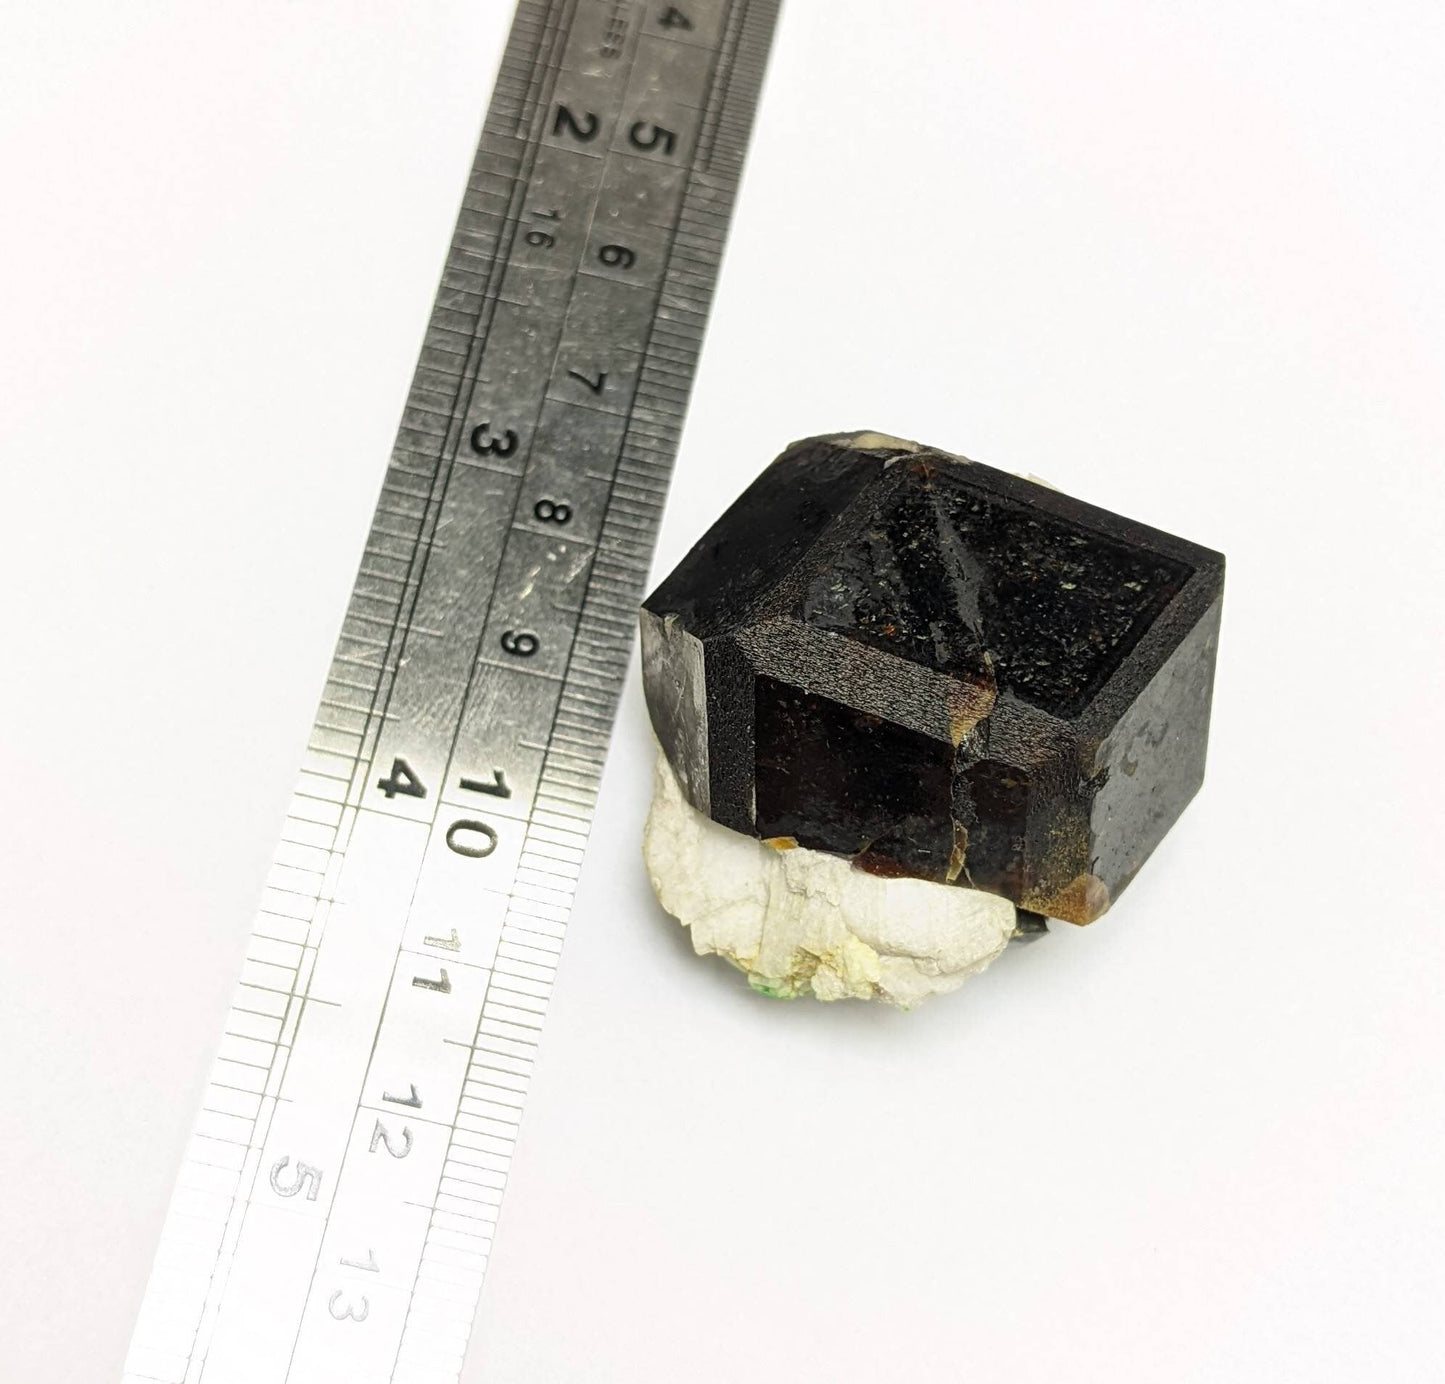 ARSAA GEMS AND MINERALSOn matrix completely terminated Lustrous andradite garnet crystal with green epidote, 53.8 grams - Premium  from ARSAA GEMS AND MINERALS - Just $150.00! Shop now at ARSAA GEMS AND MINERALS